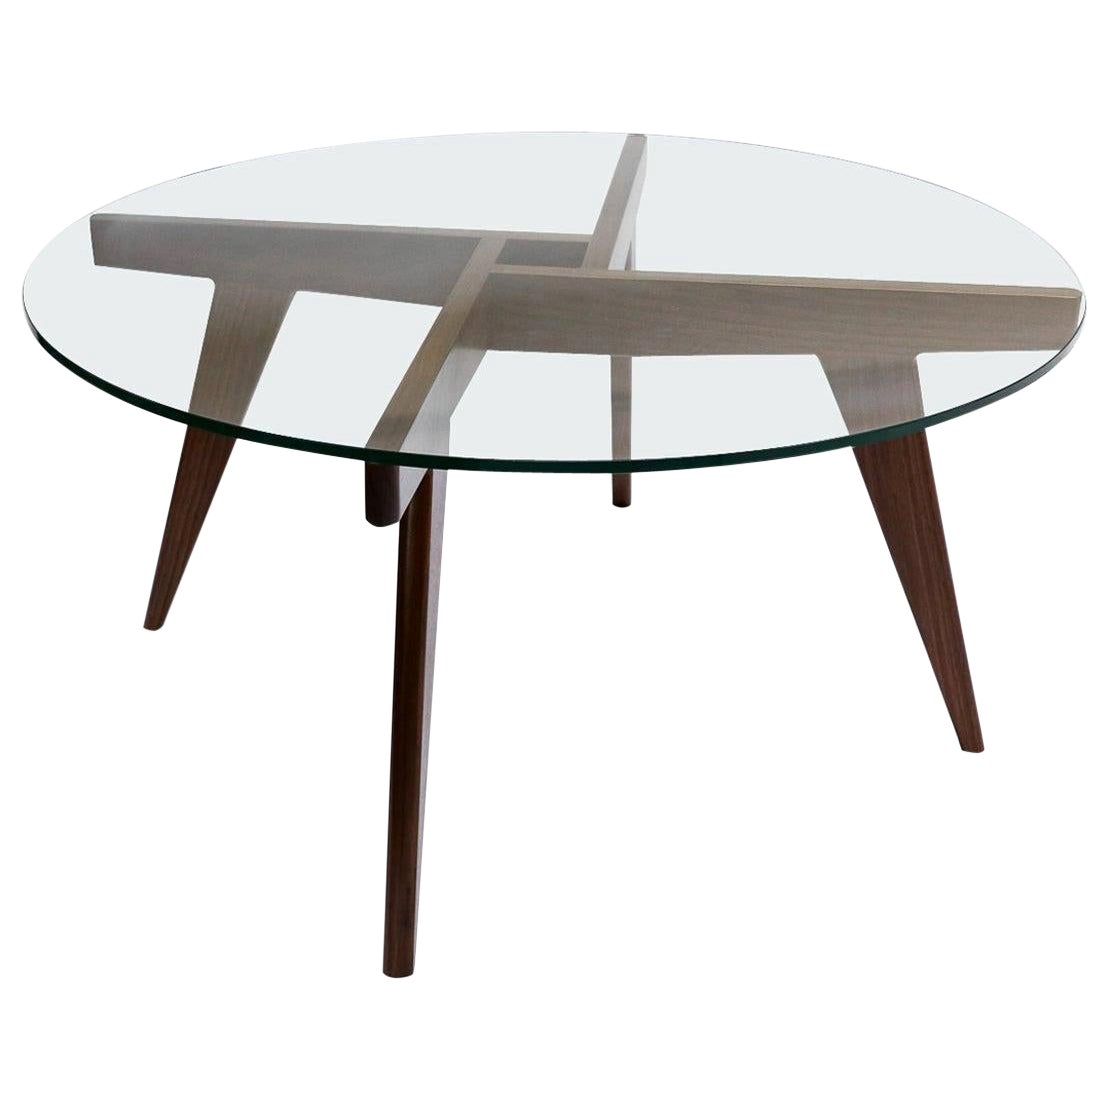 Custom Walnut Midcentury Style Coffee Table with Glass Top by Adesso Imports For Sale